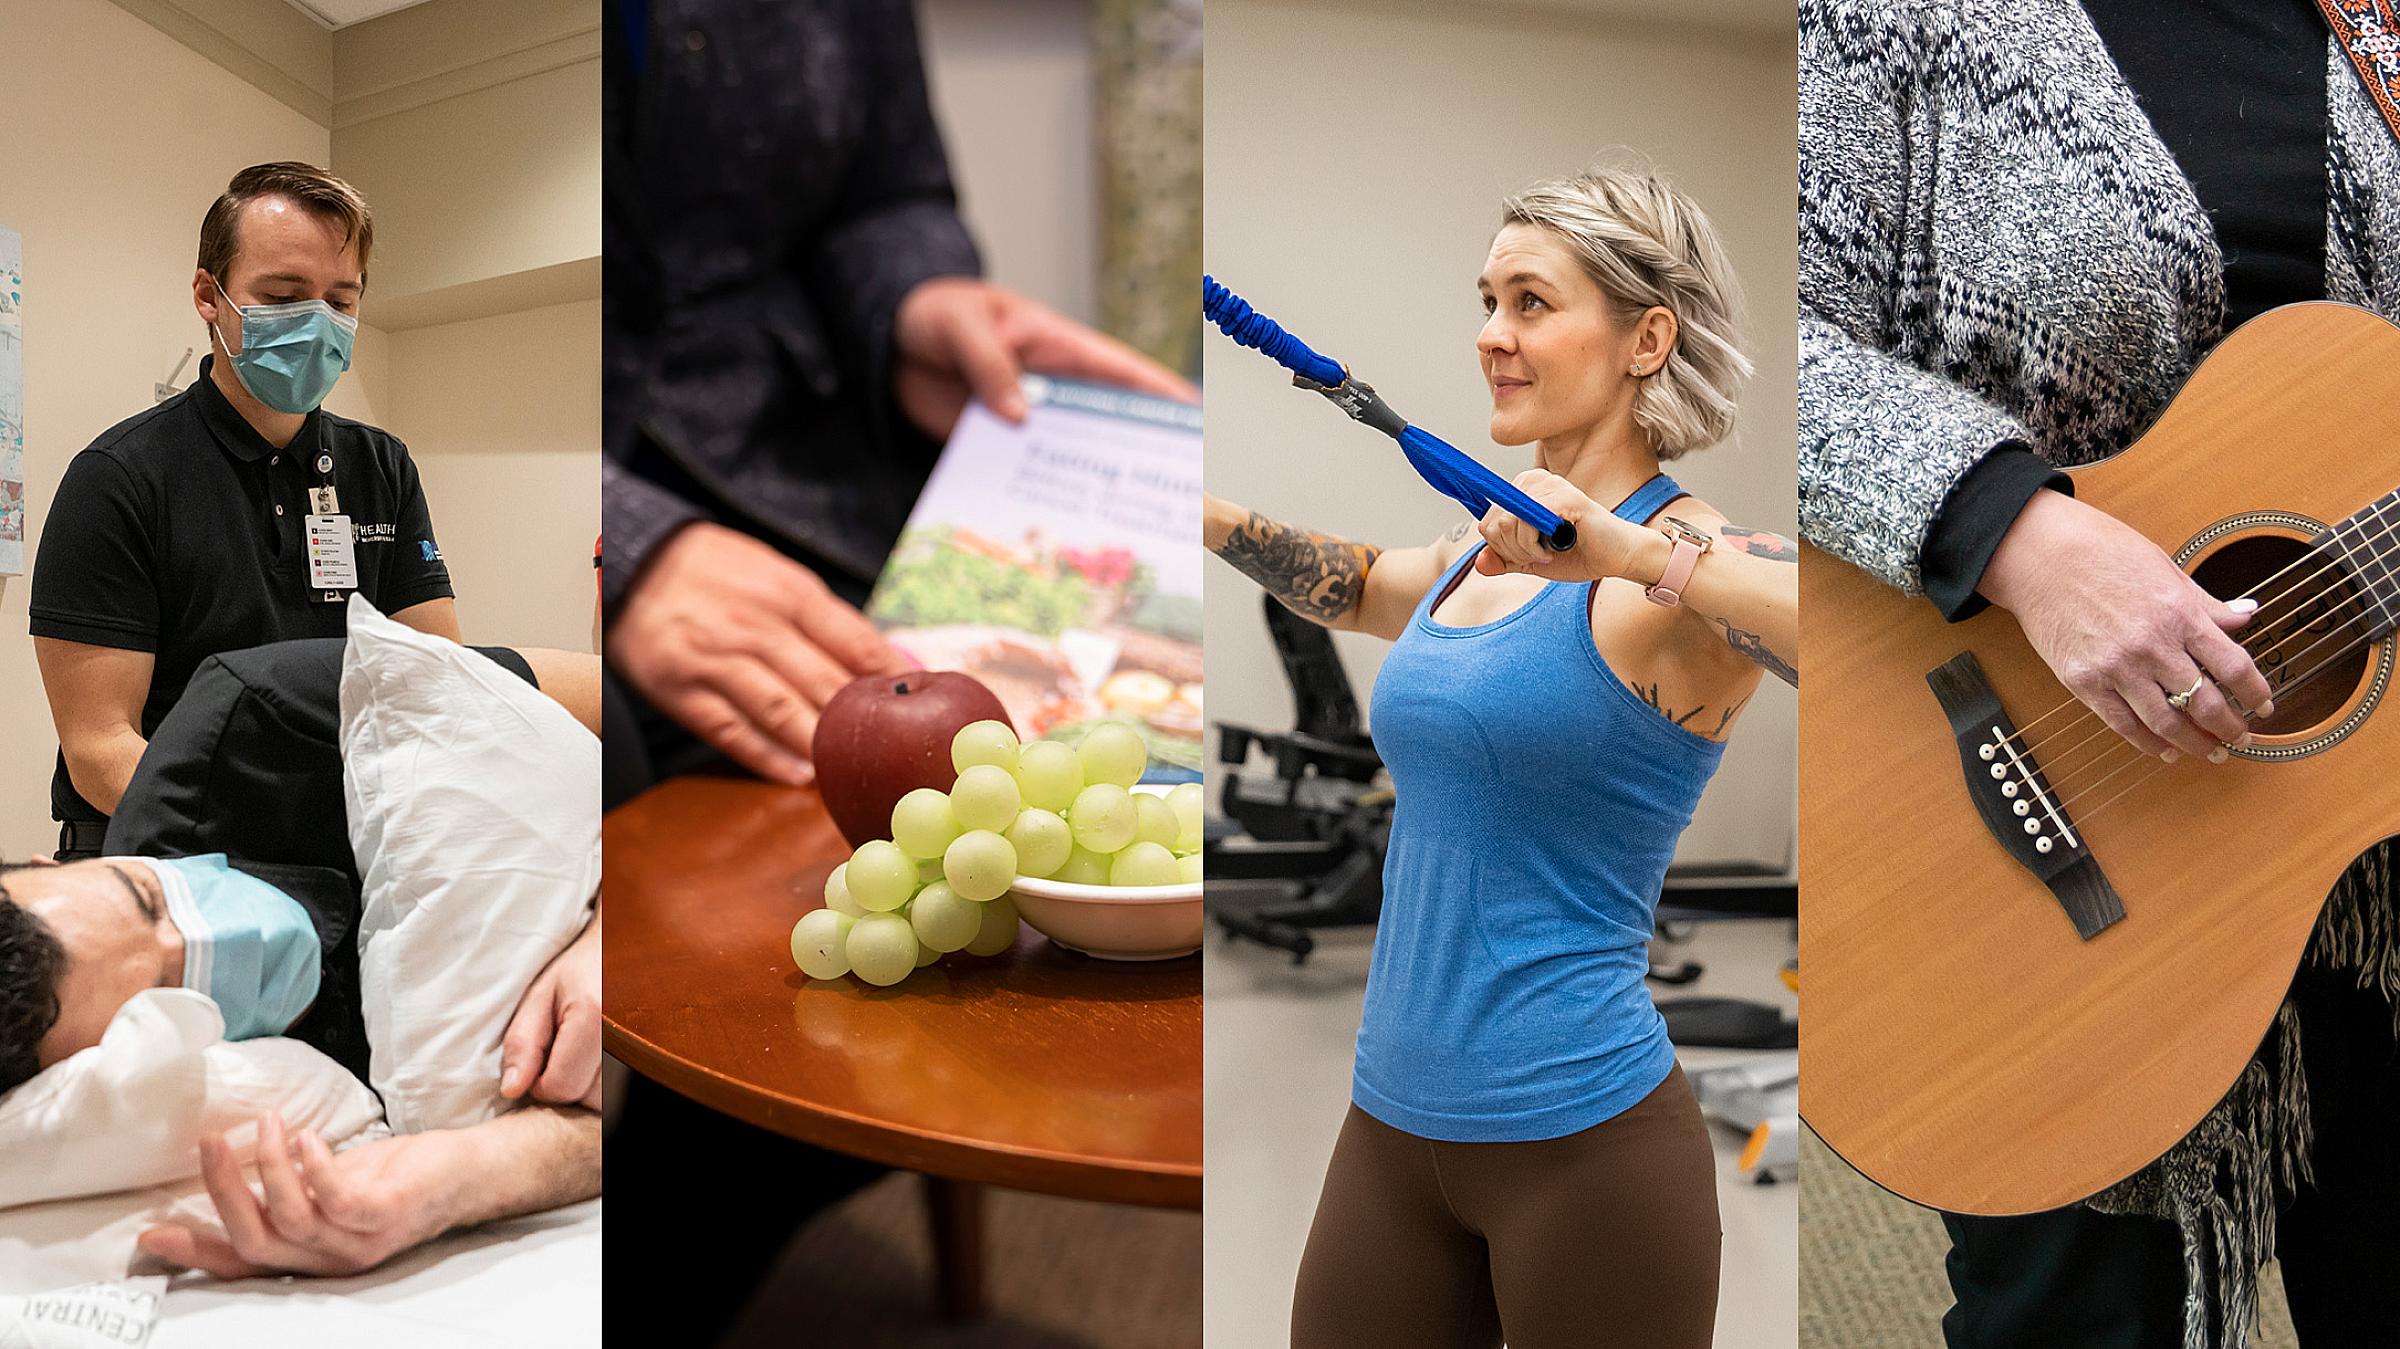 Left to right: massage therapist giving a massage, patient looking at nutrition flyer, staff demonstrating exercise, music therapist holding guitar, acupuncture specialist working on a patient